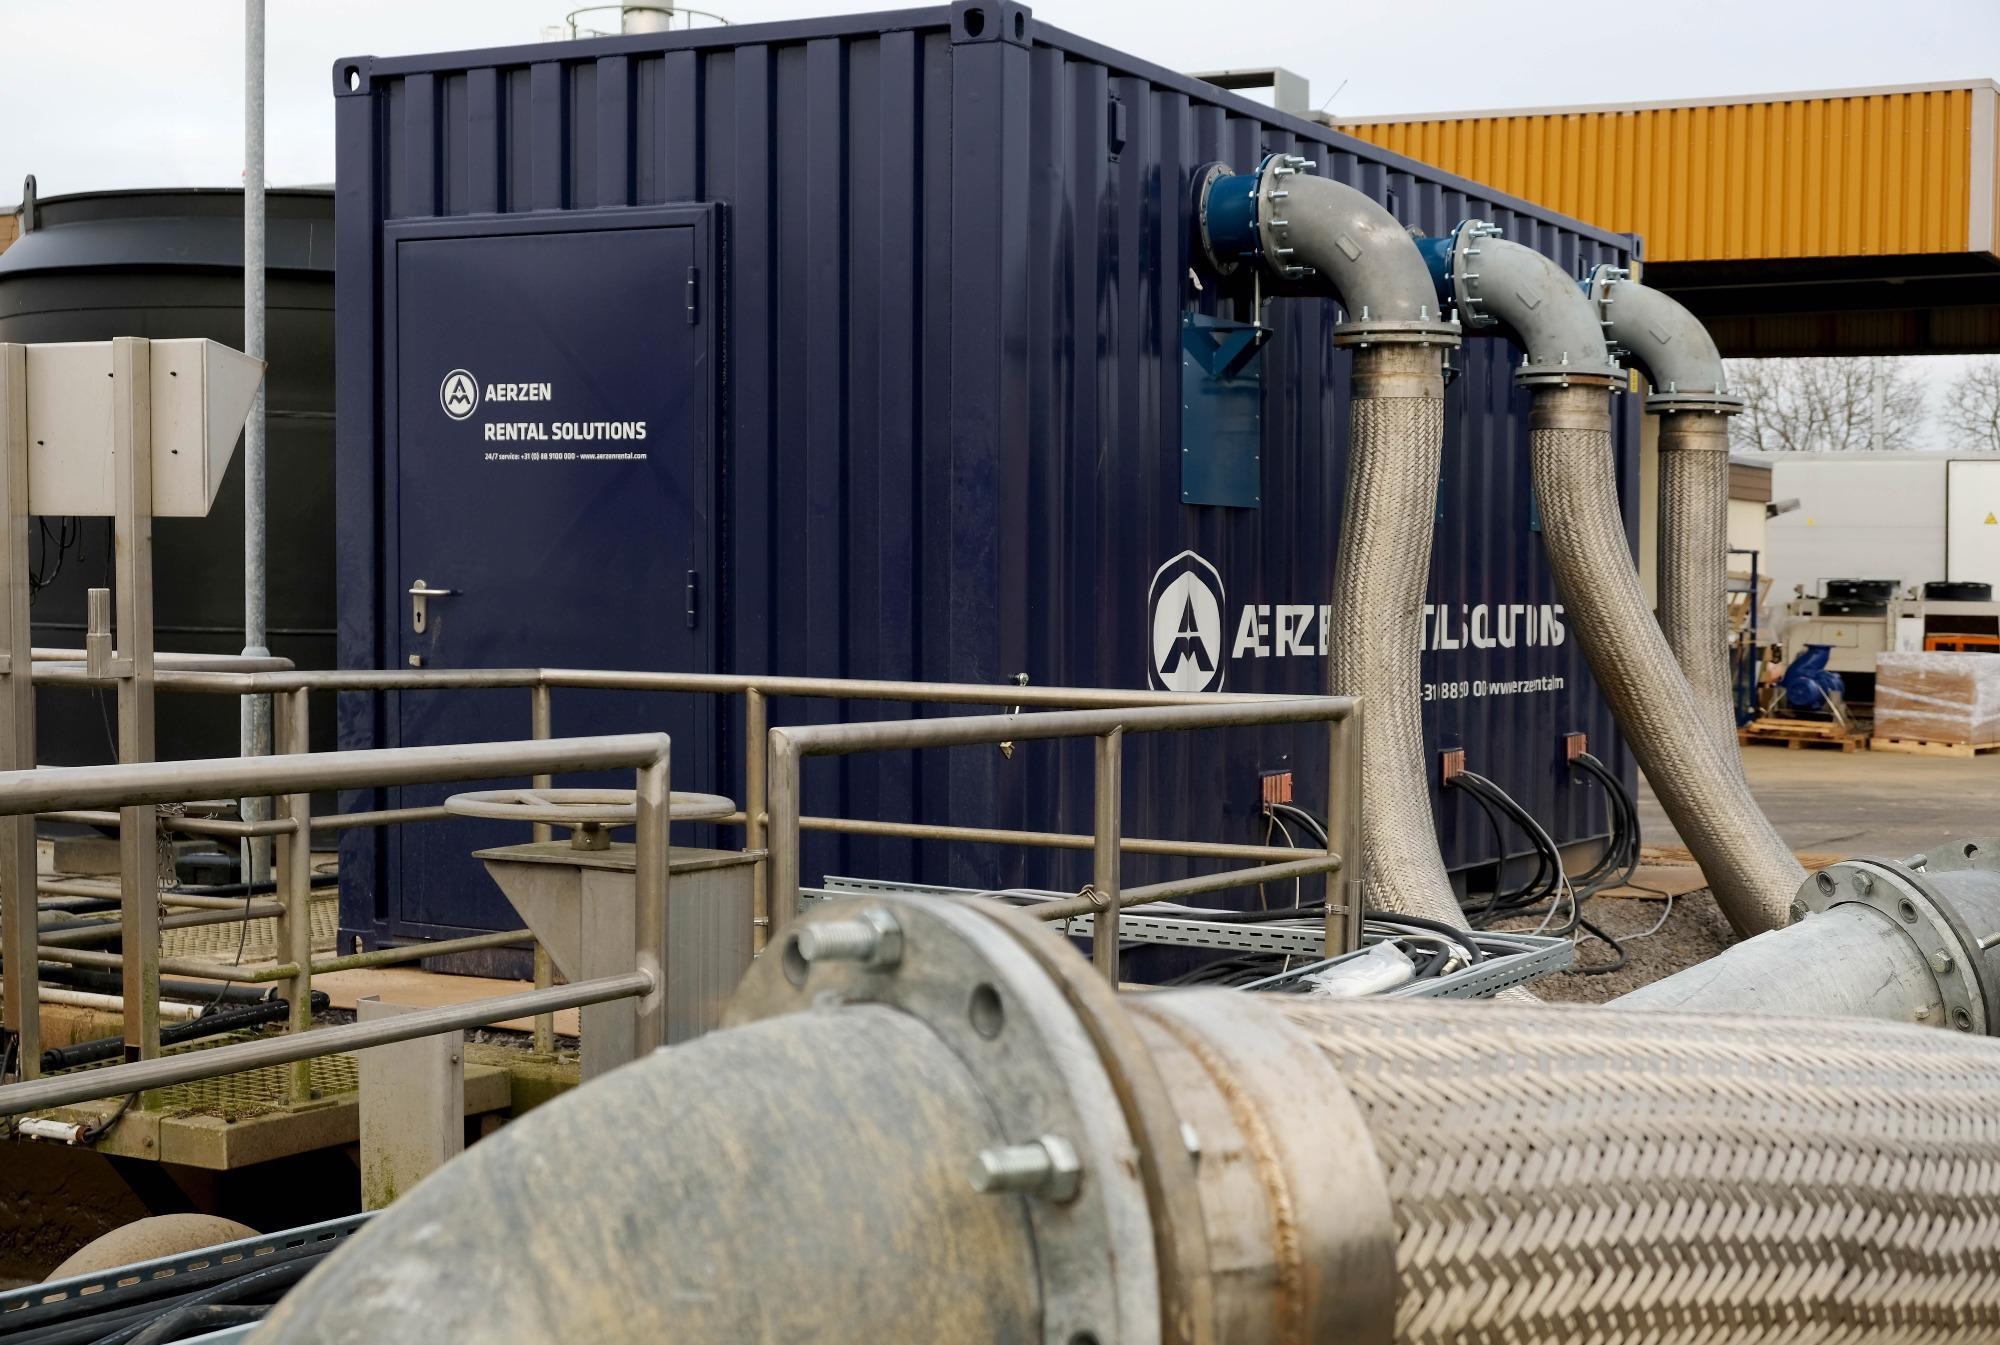 Wastewater Treatment Solutions with Aerzen Rental